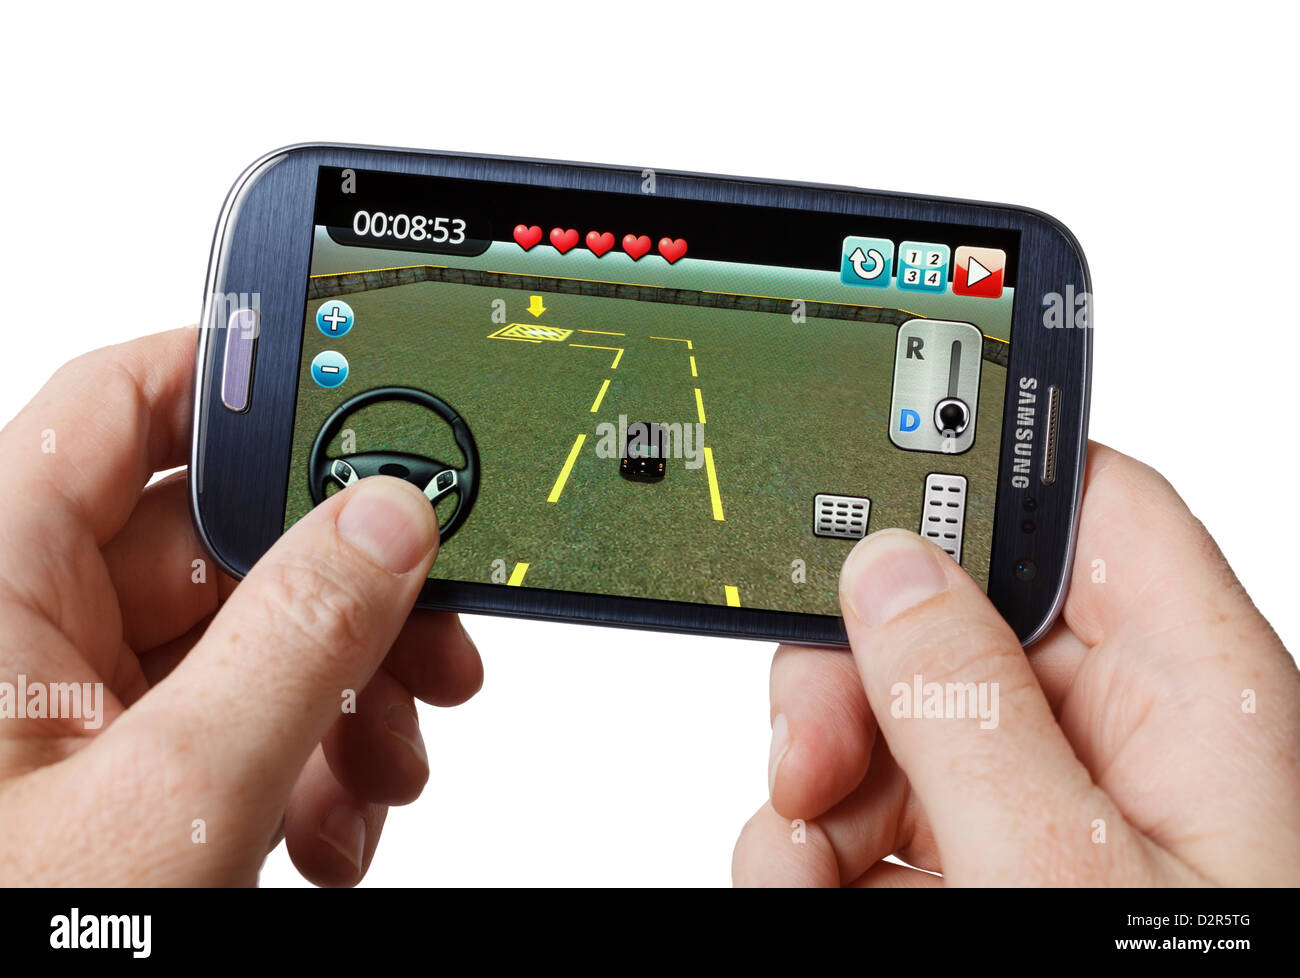 Playing a game on a mobile phone smartphone smart phone Stock Photo